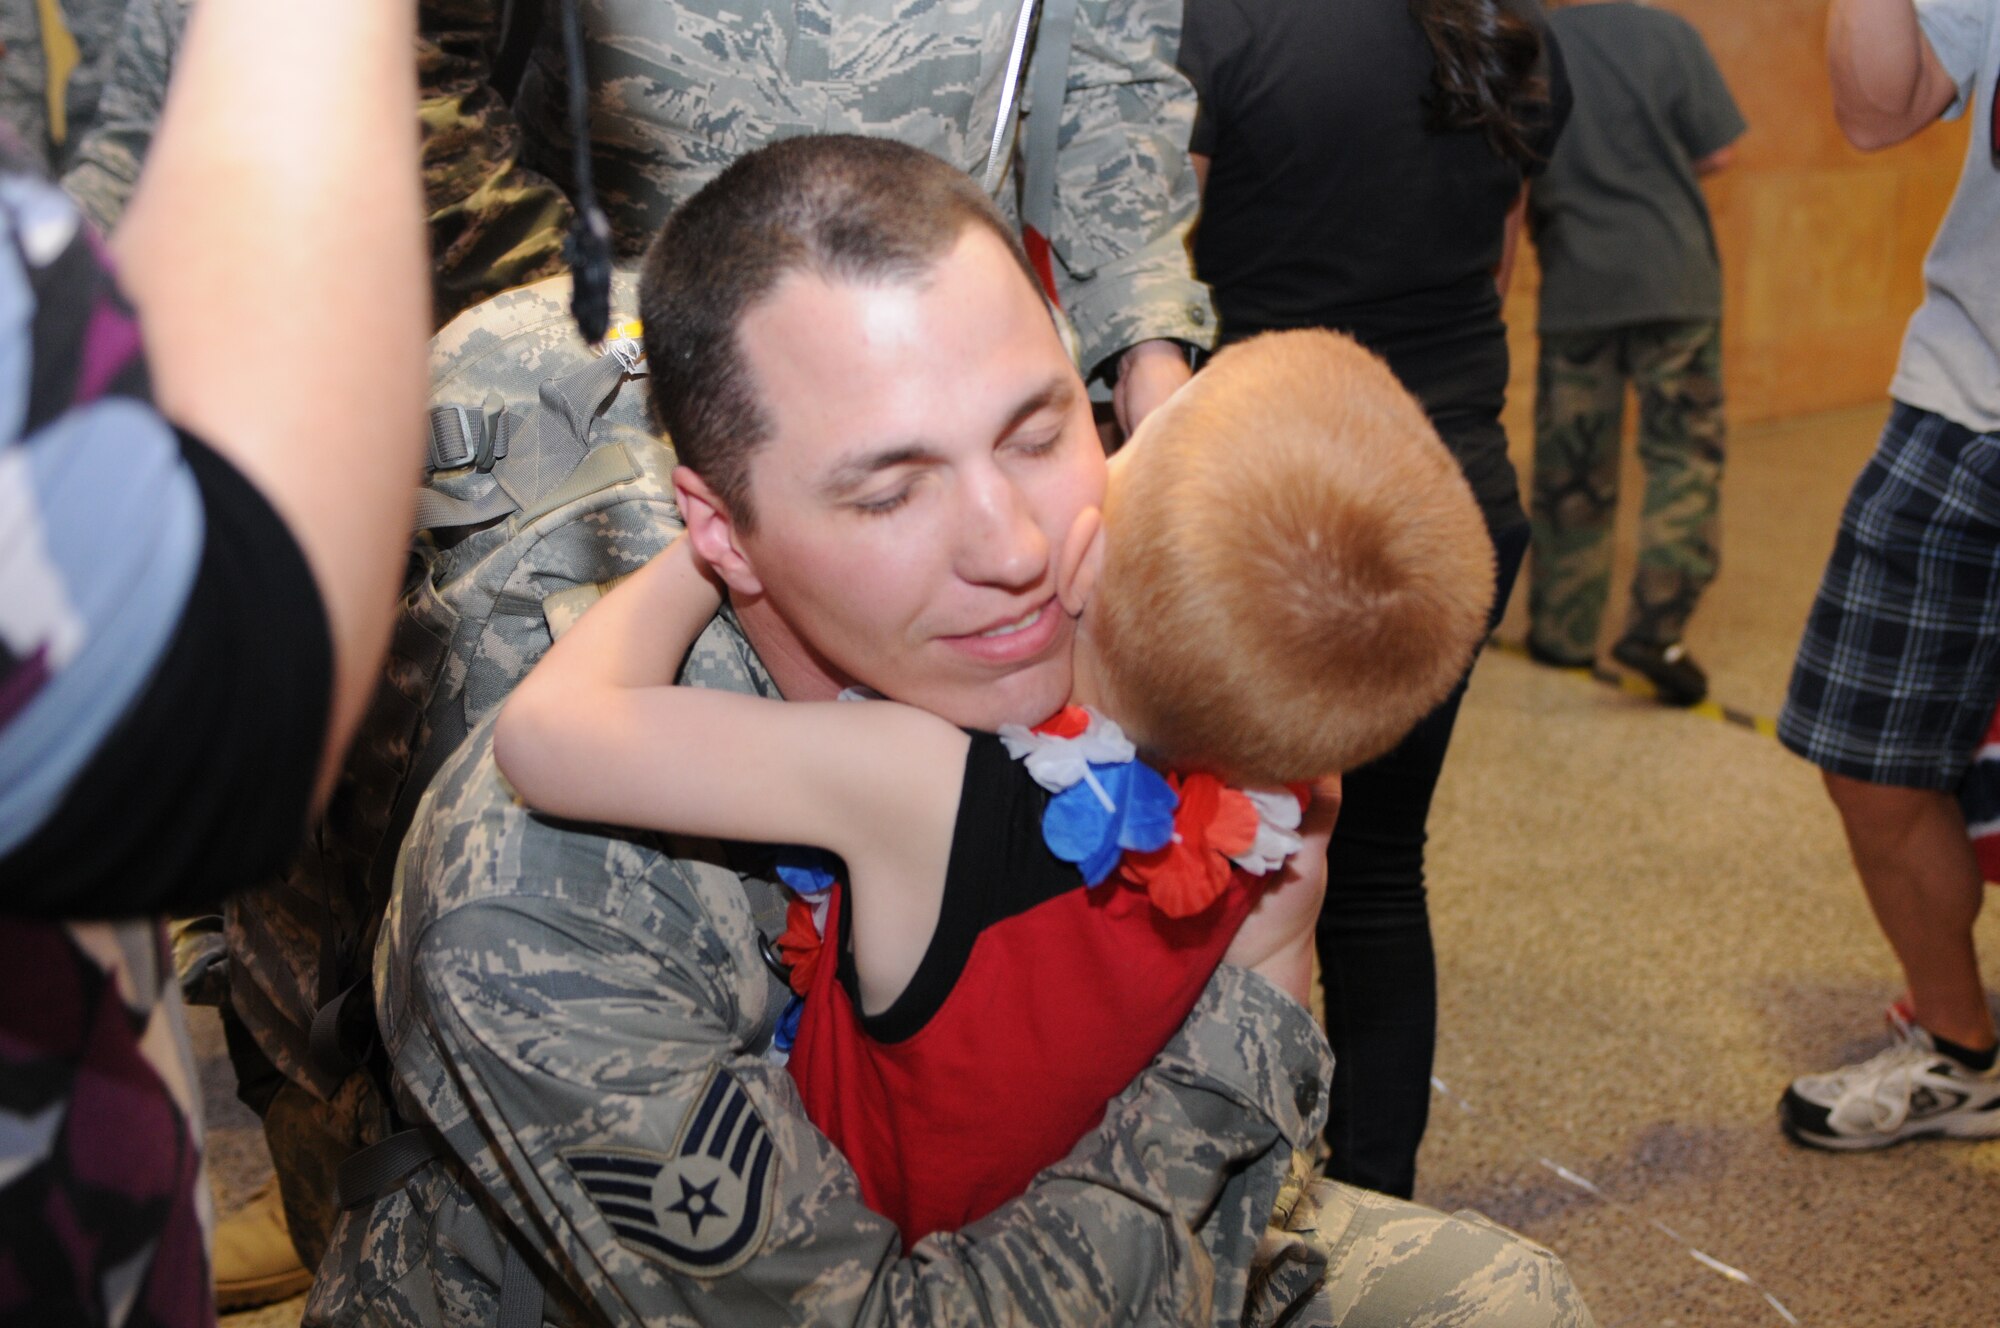 Staff Sgt. Jonathan Morphew is welcomed home after a five-month deployment to Iraq, June 7. Family and friends celebrated the return of 29 security forces Airmen assigned to the 162nd Fighter Wing at Tucson International Airport. (Air Force photo by Maj. Gabe Johnson)